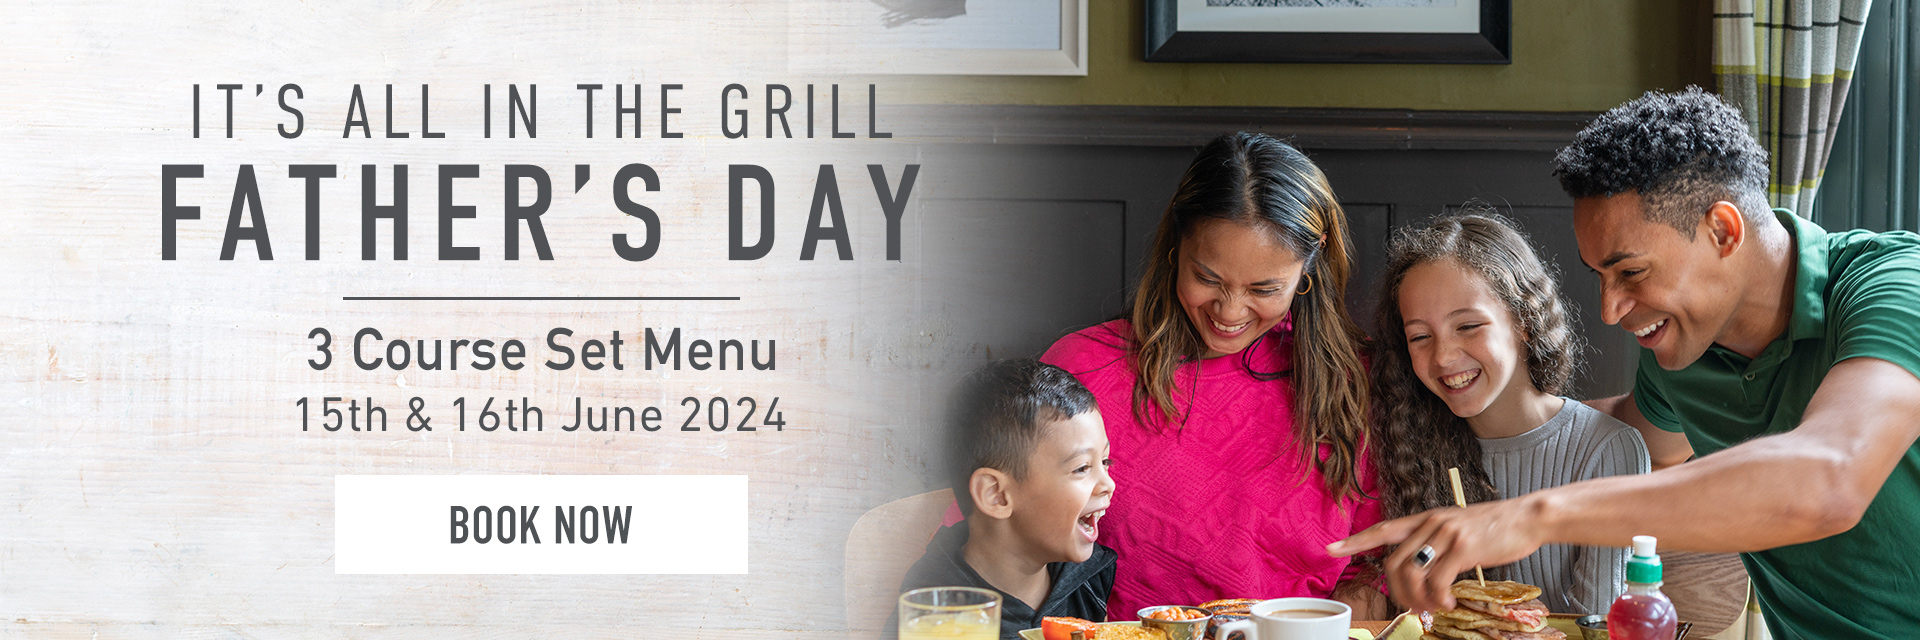 Father’s Day at The George Inn